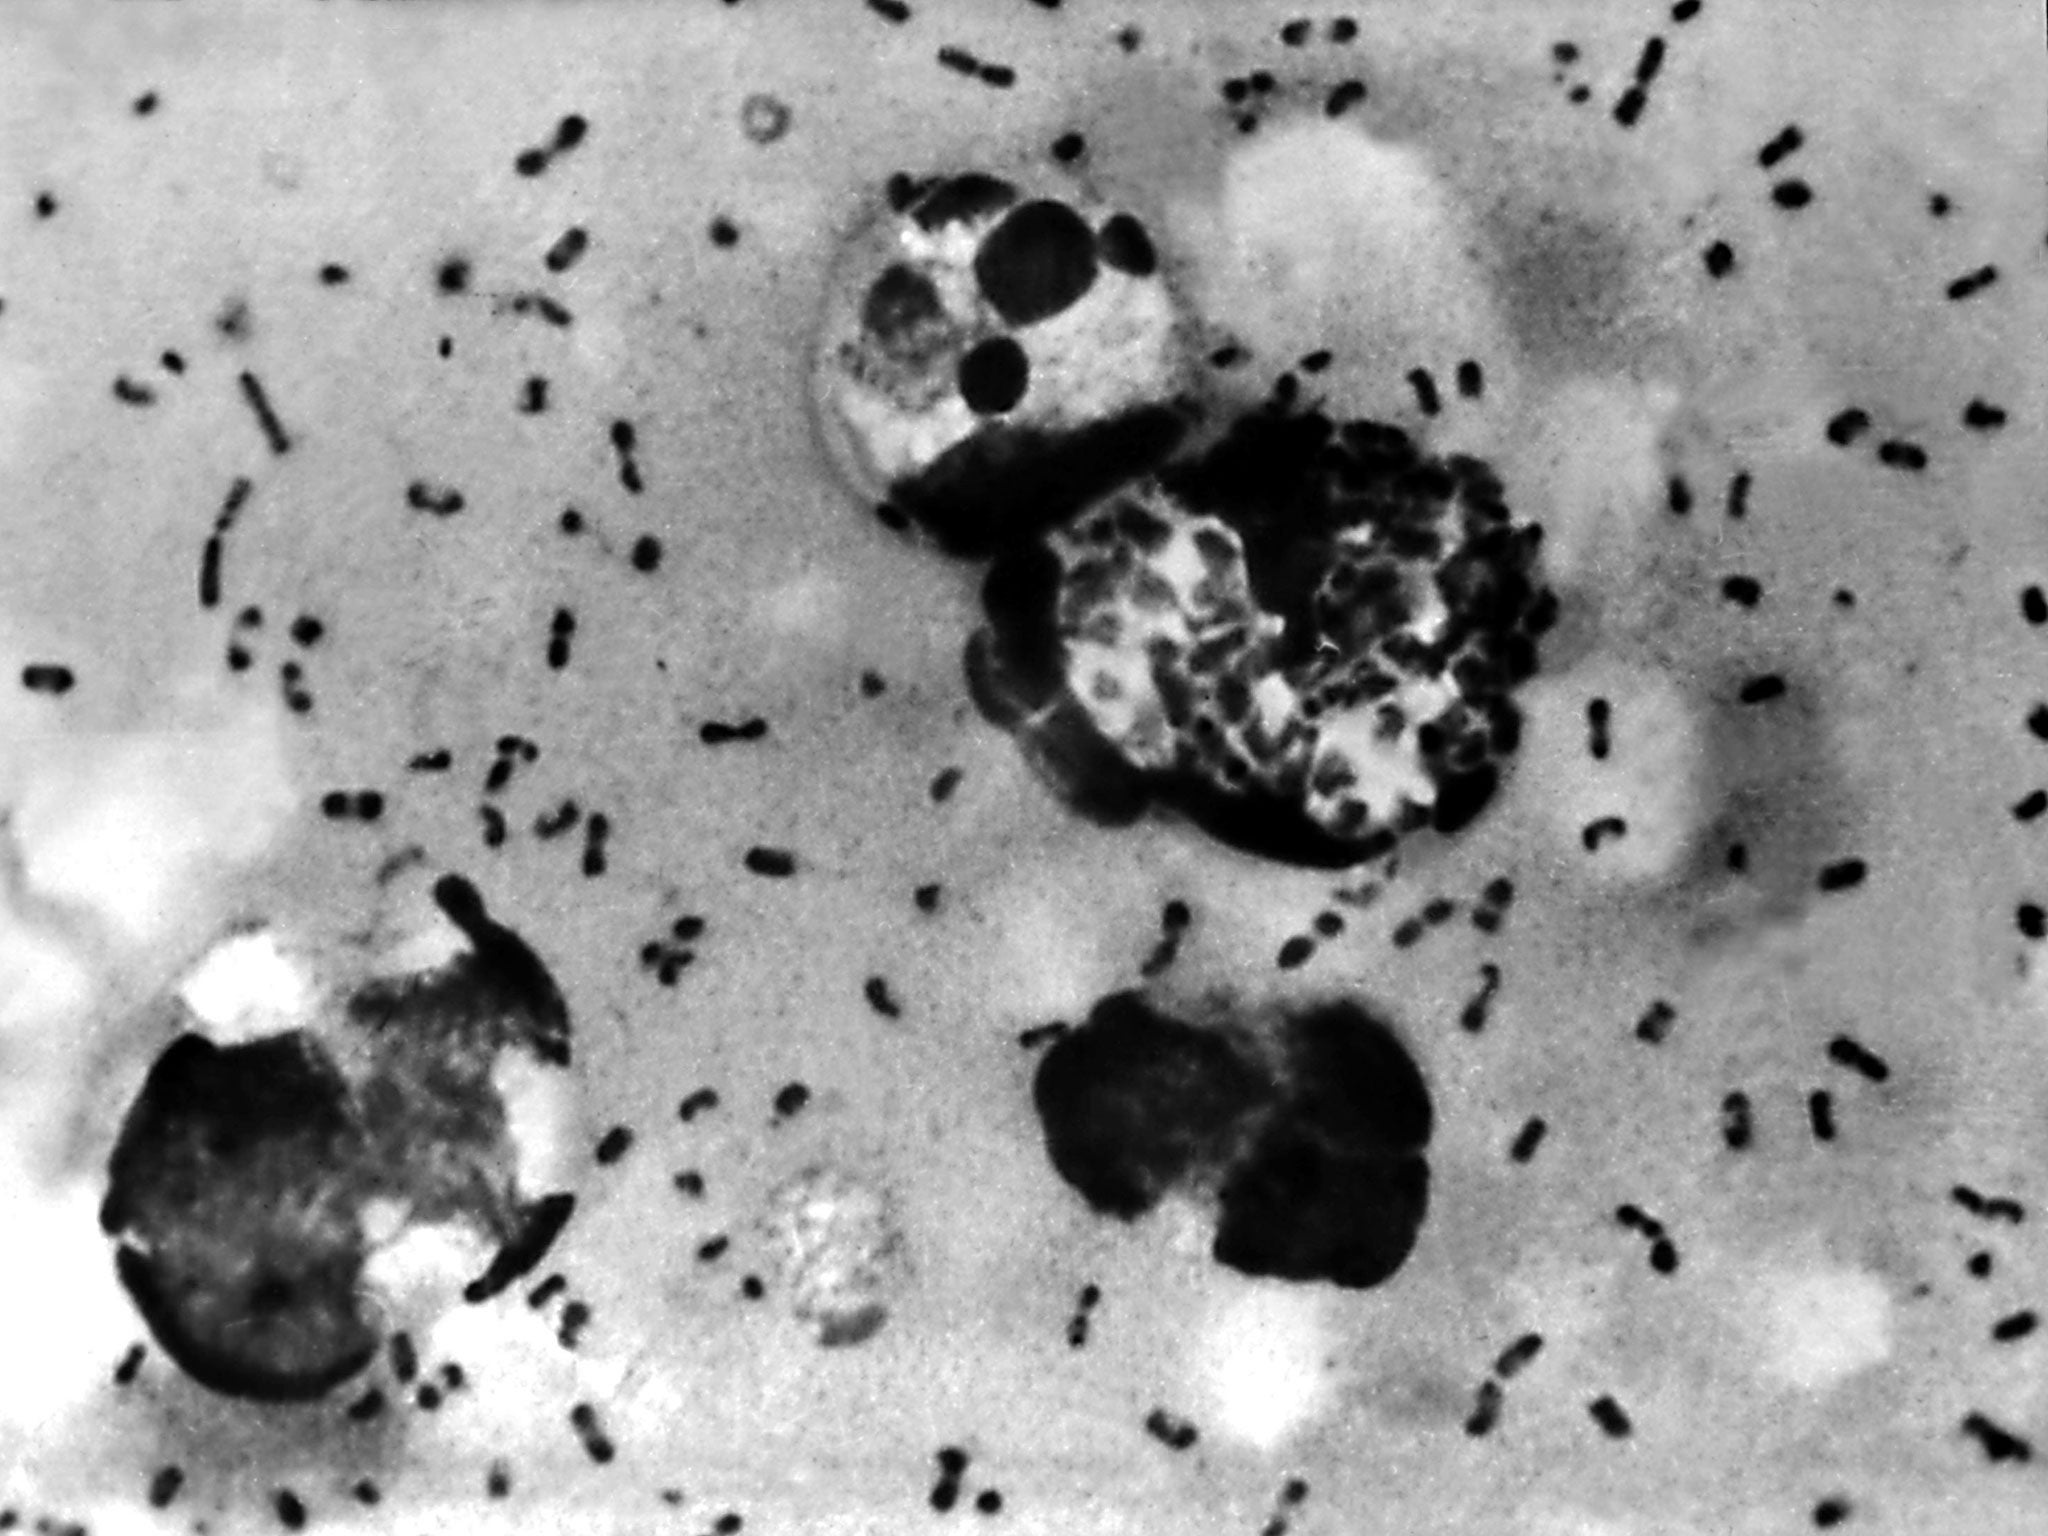 A bubonic plague smear, prepared from a lymph removed from an adenopathic lymph node, or bubo, of a plague patient